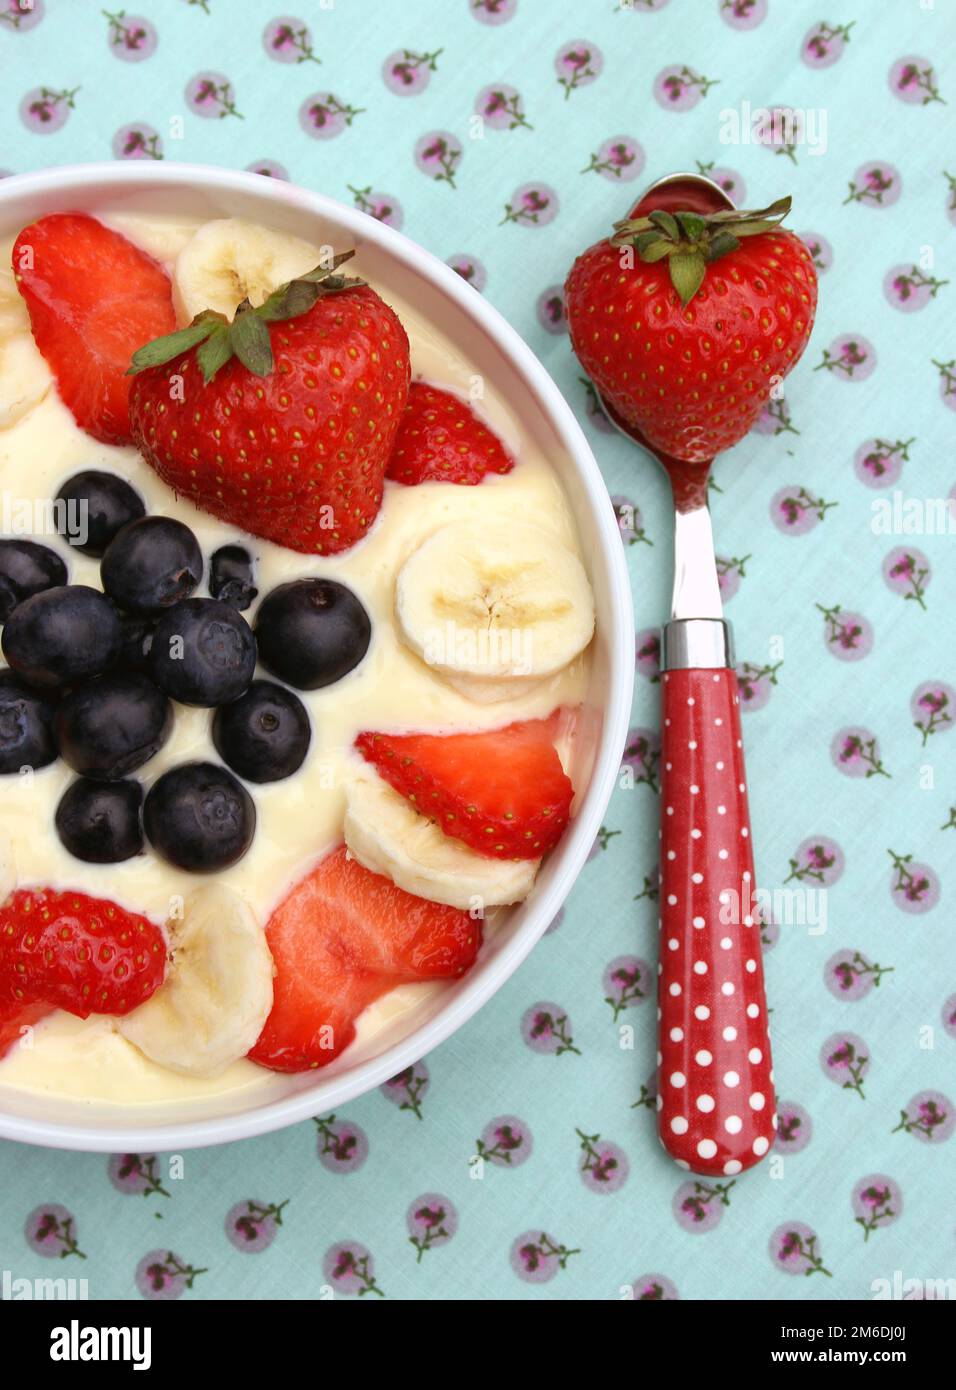 Curd with Strawberries, Blueberries, Banana Stock Photo